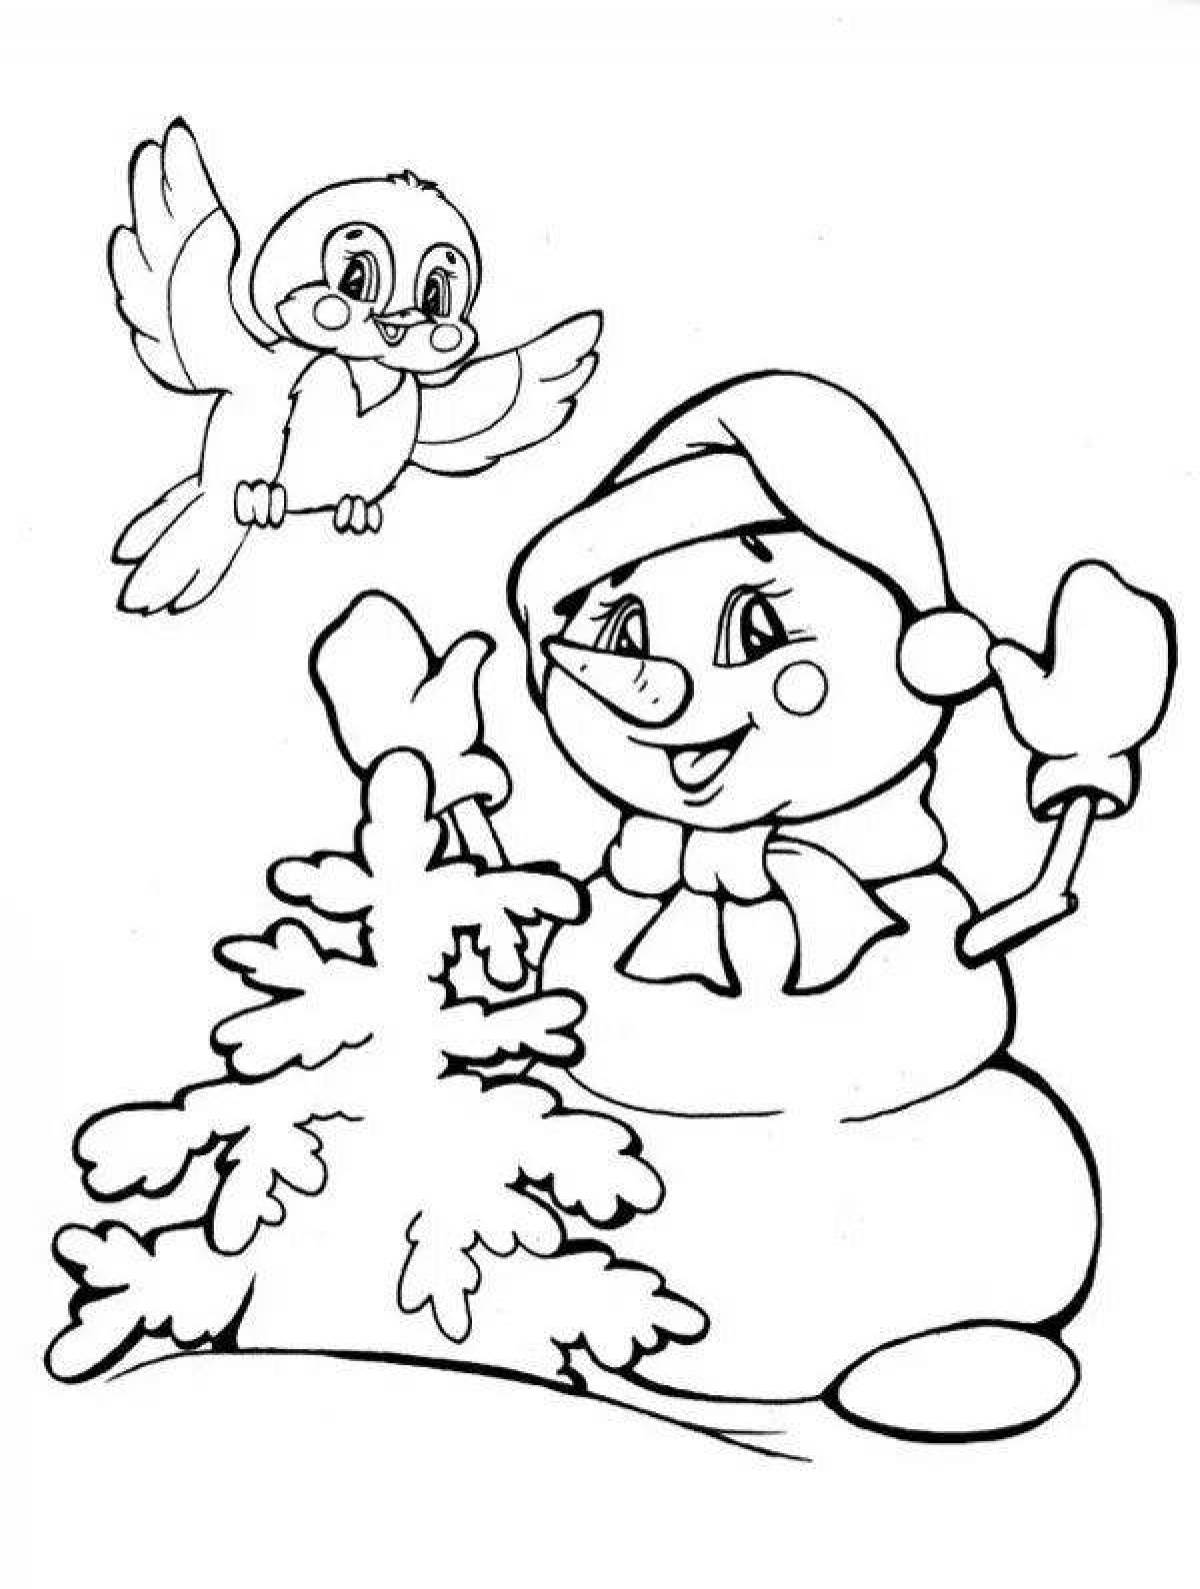 Magic coloring drawing of a winter fairy tale